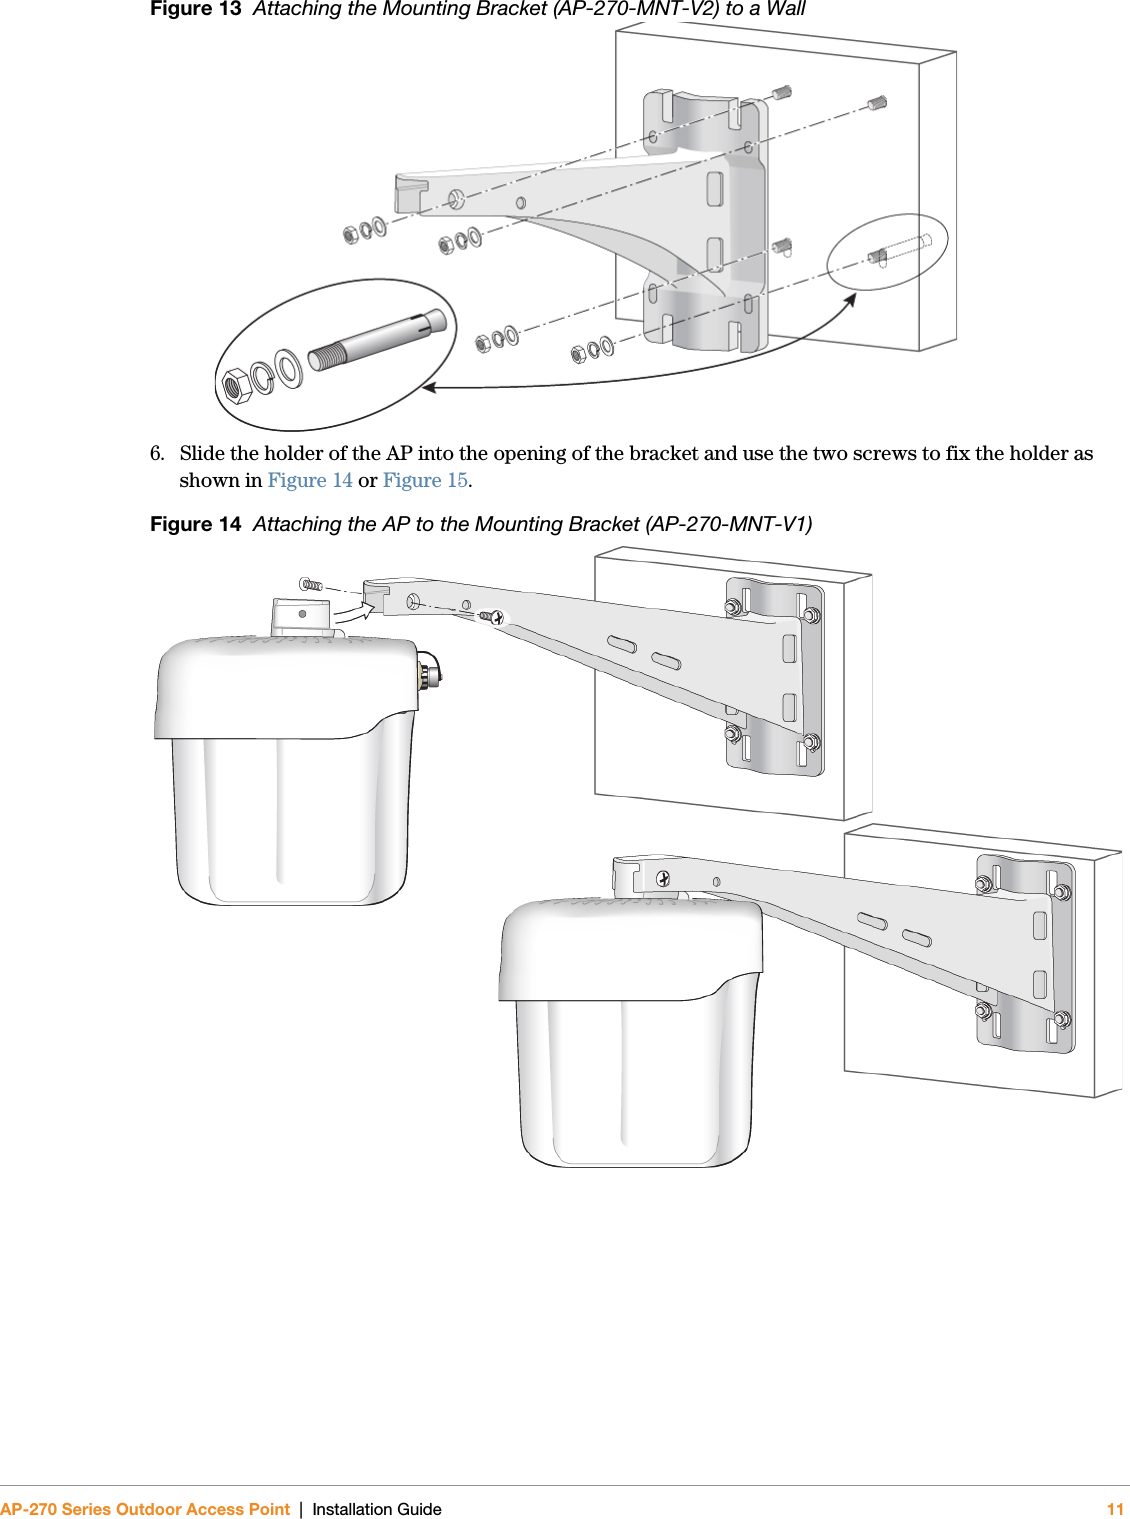 AP-270 Series Outdoor Access Point | Installation Guide 11Figure 13  Attaching the Mounting Bracket (AP-270-MNT-V2) to a Wall 6. Slide the holder of the AP into the opening of the bracket and use the two screws to fix the holder as shown in Figure 14 or Figure 15.Figure 14  Attaching the AP to the Mounting Bracket (AP-270-MNT-V1)